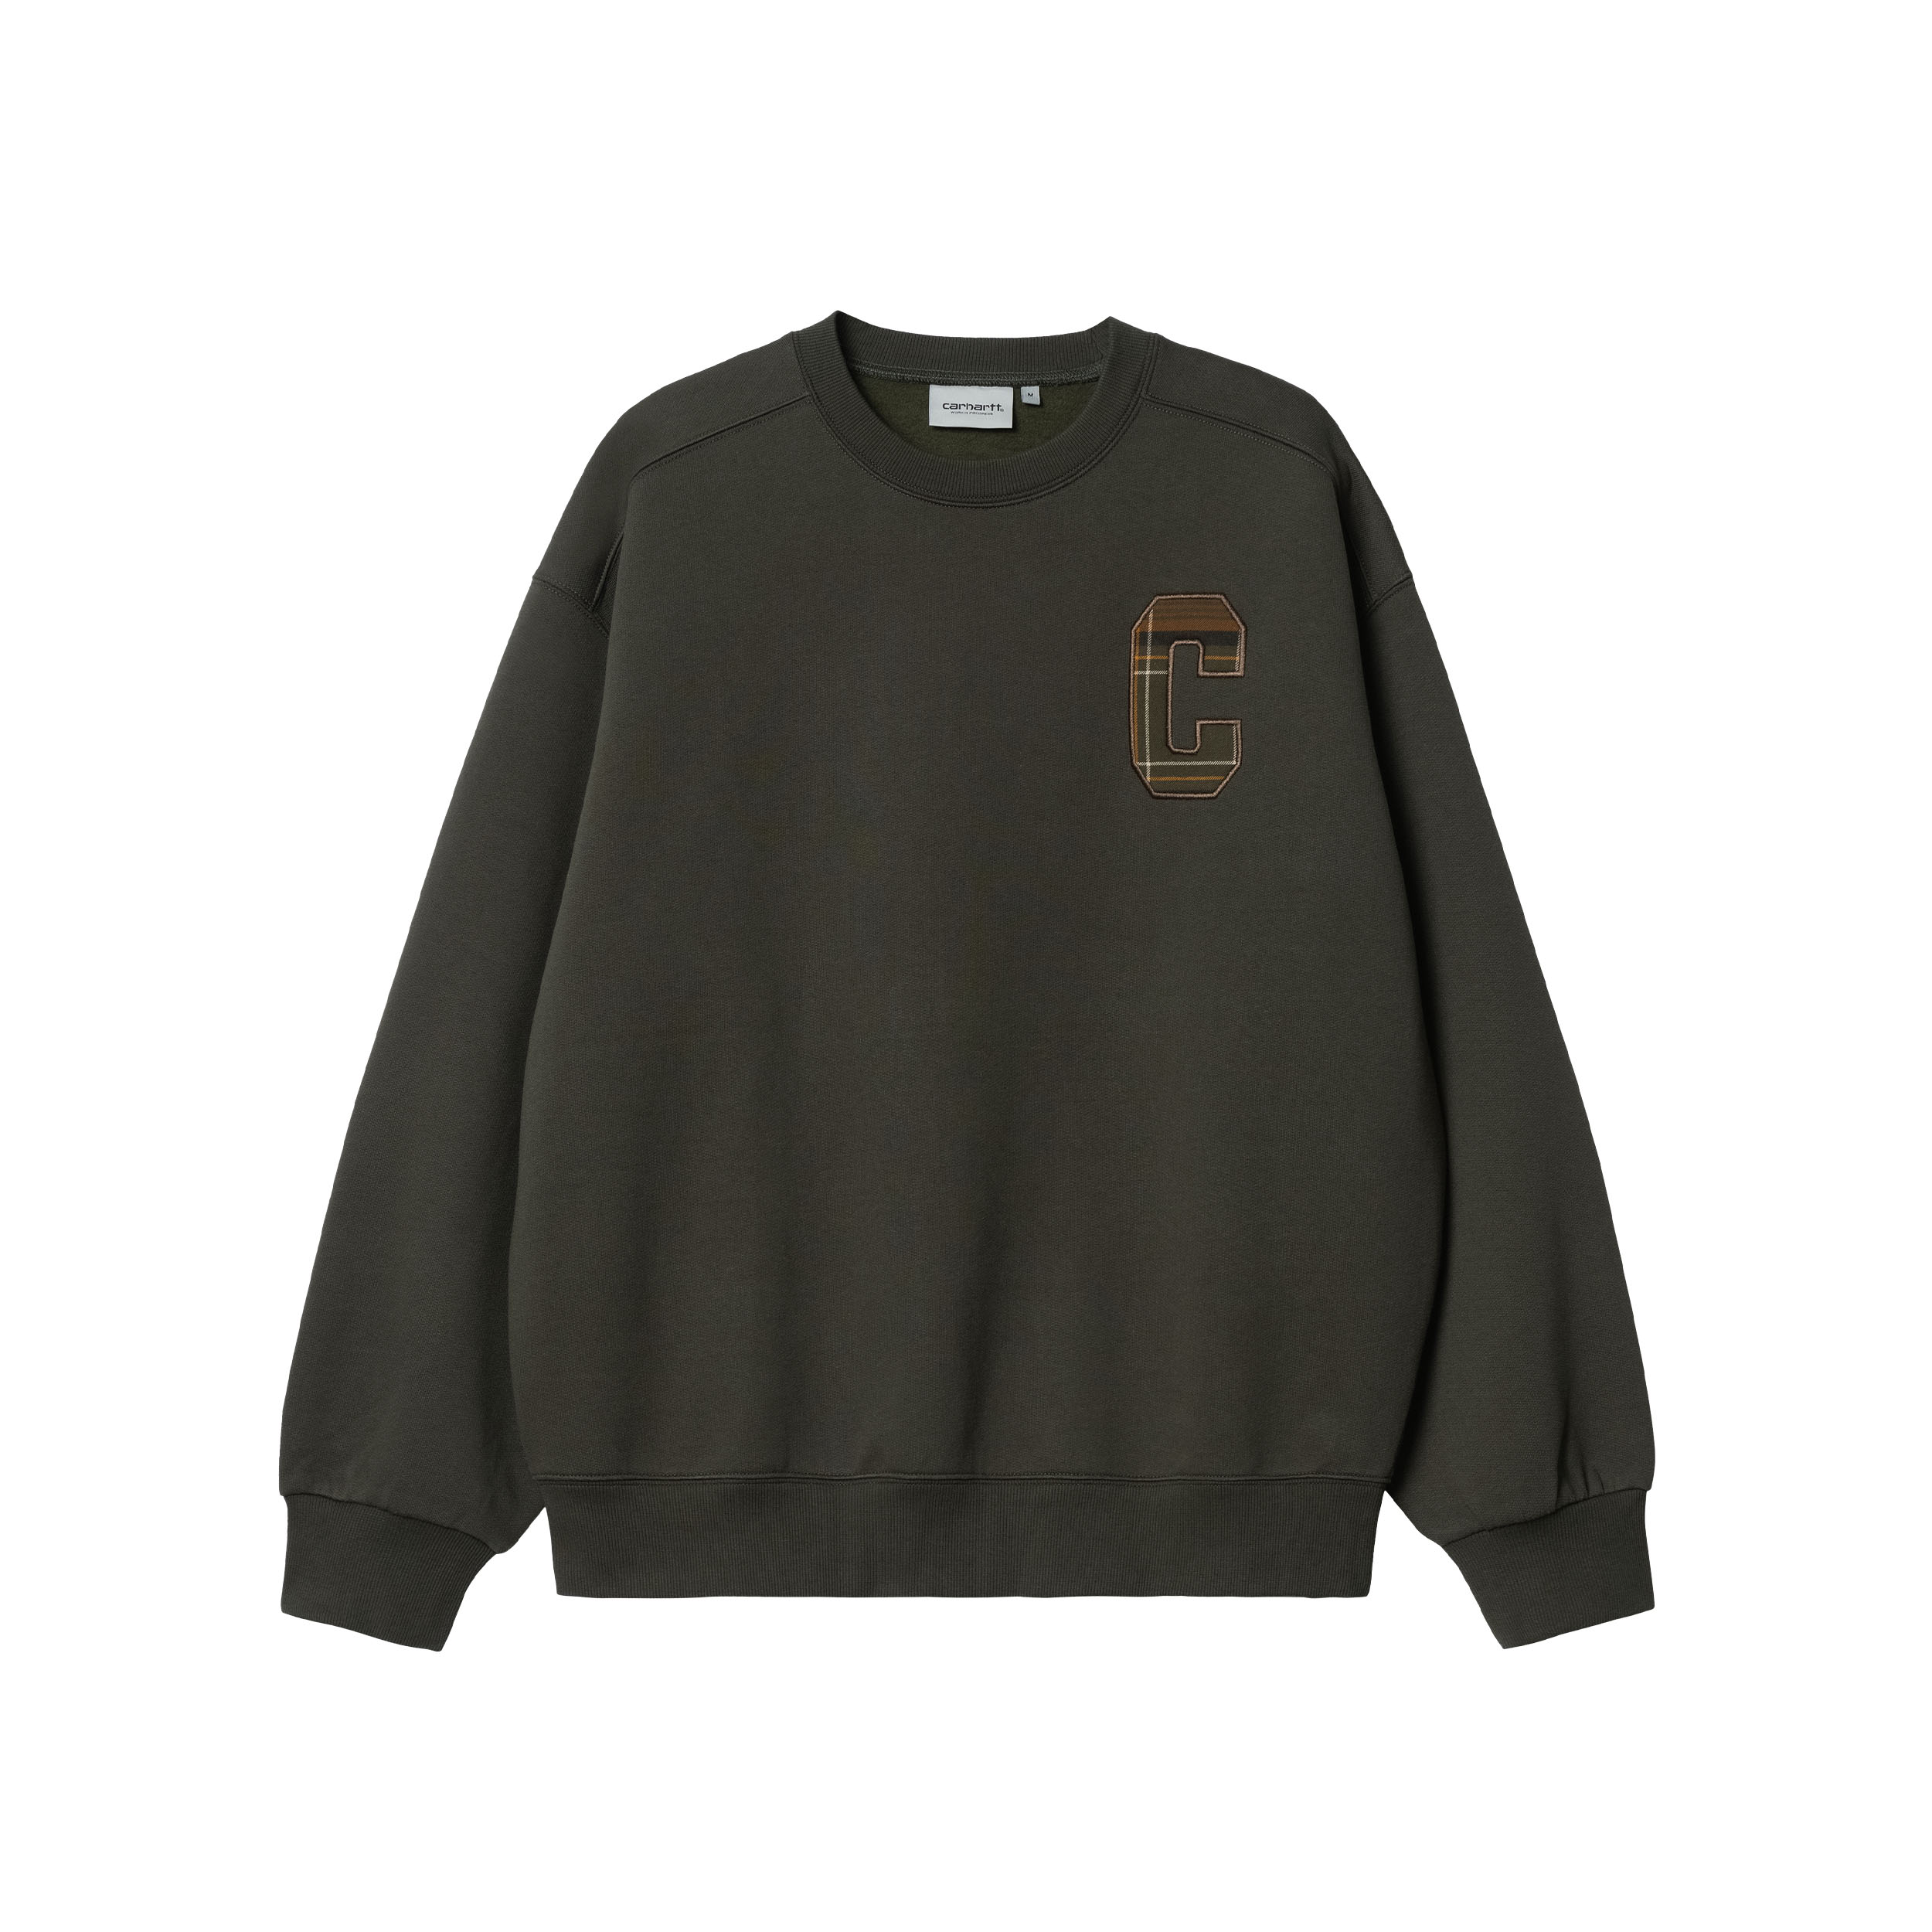 Carhartt WIP Wiles Sweat (plant) - Blue Mountain Store